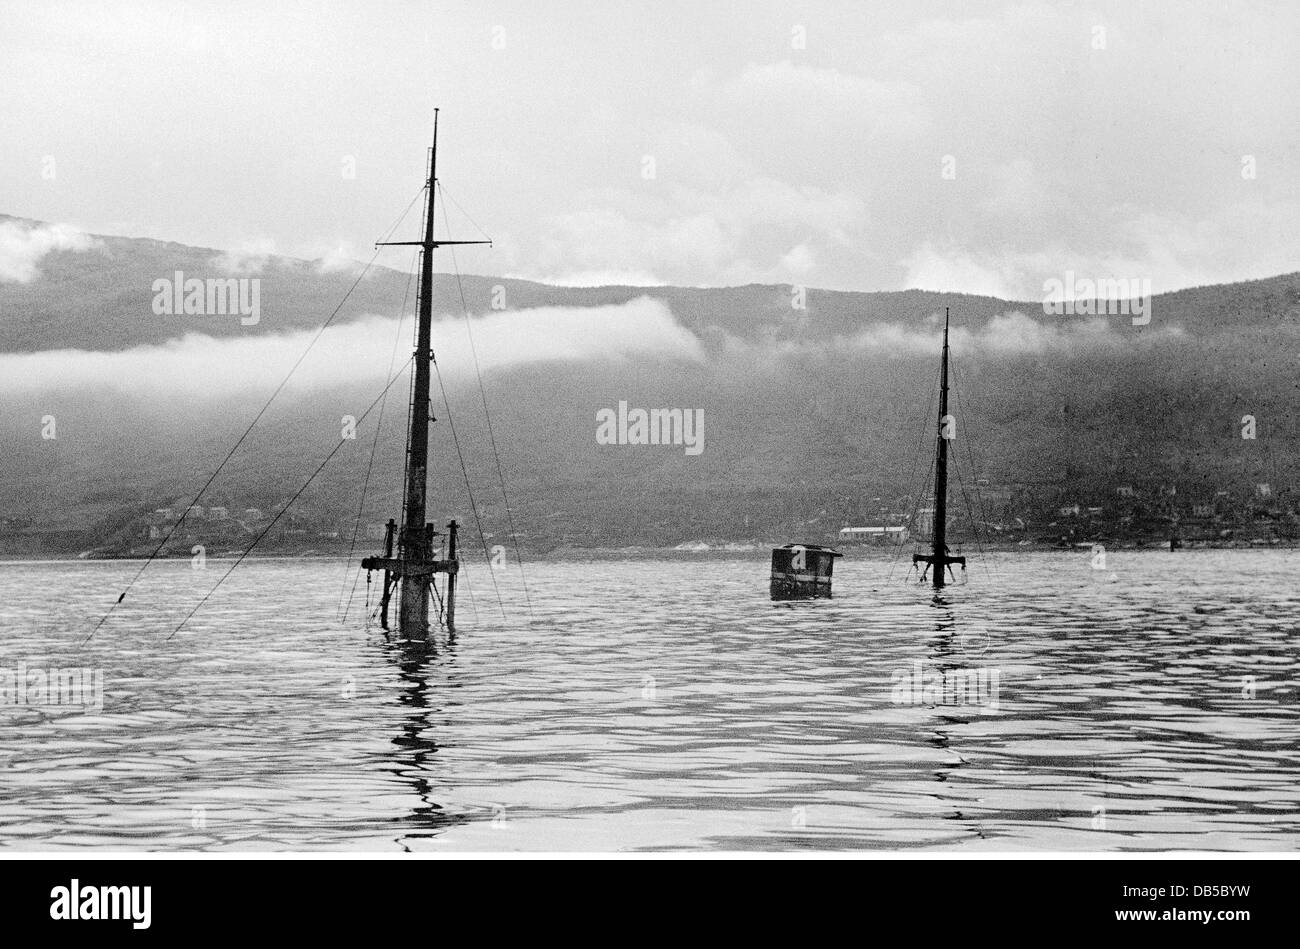 events, Second World War / WWII, Norway, sunken ship in the harbour of Narvik, 1941, Additional-Rights-Clearences-Not Available Stock Photo